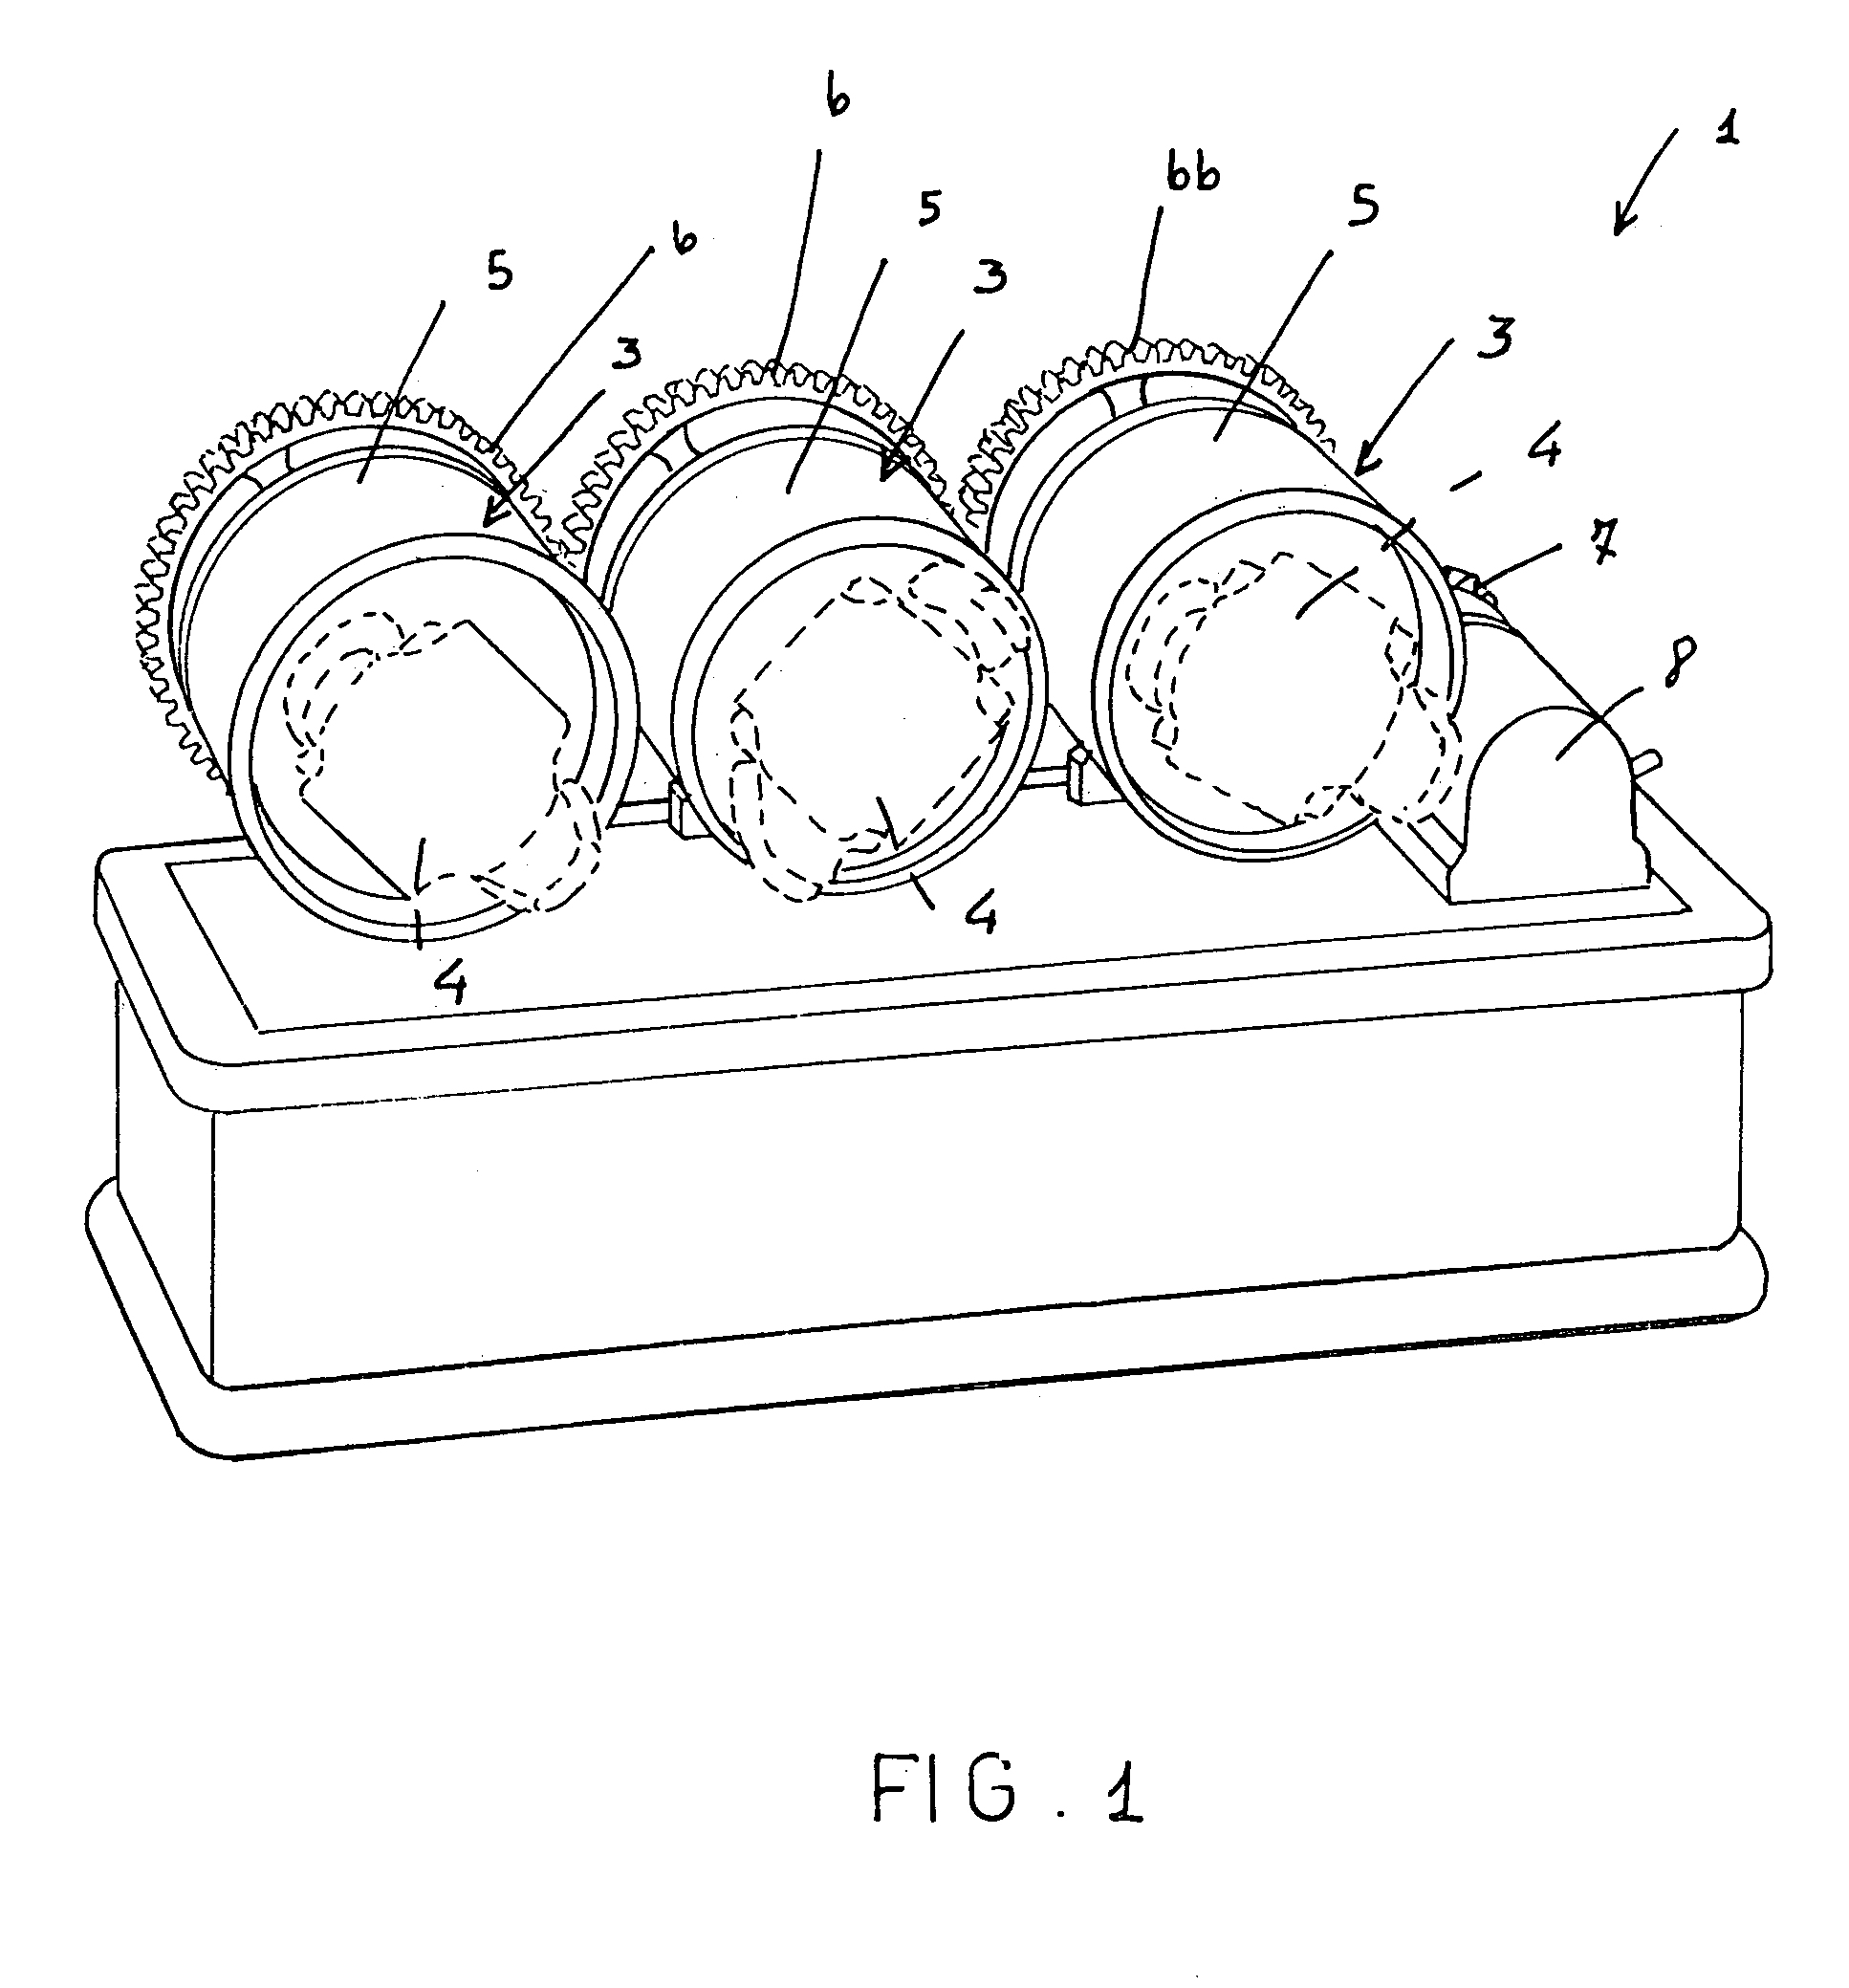 Support and winding-up device for automatic wrist watches